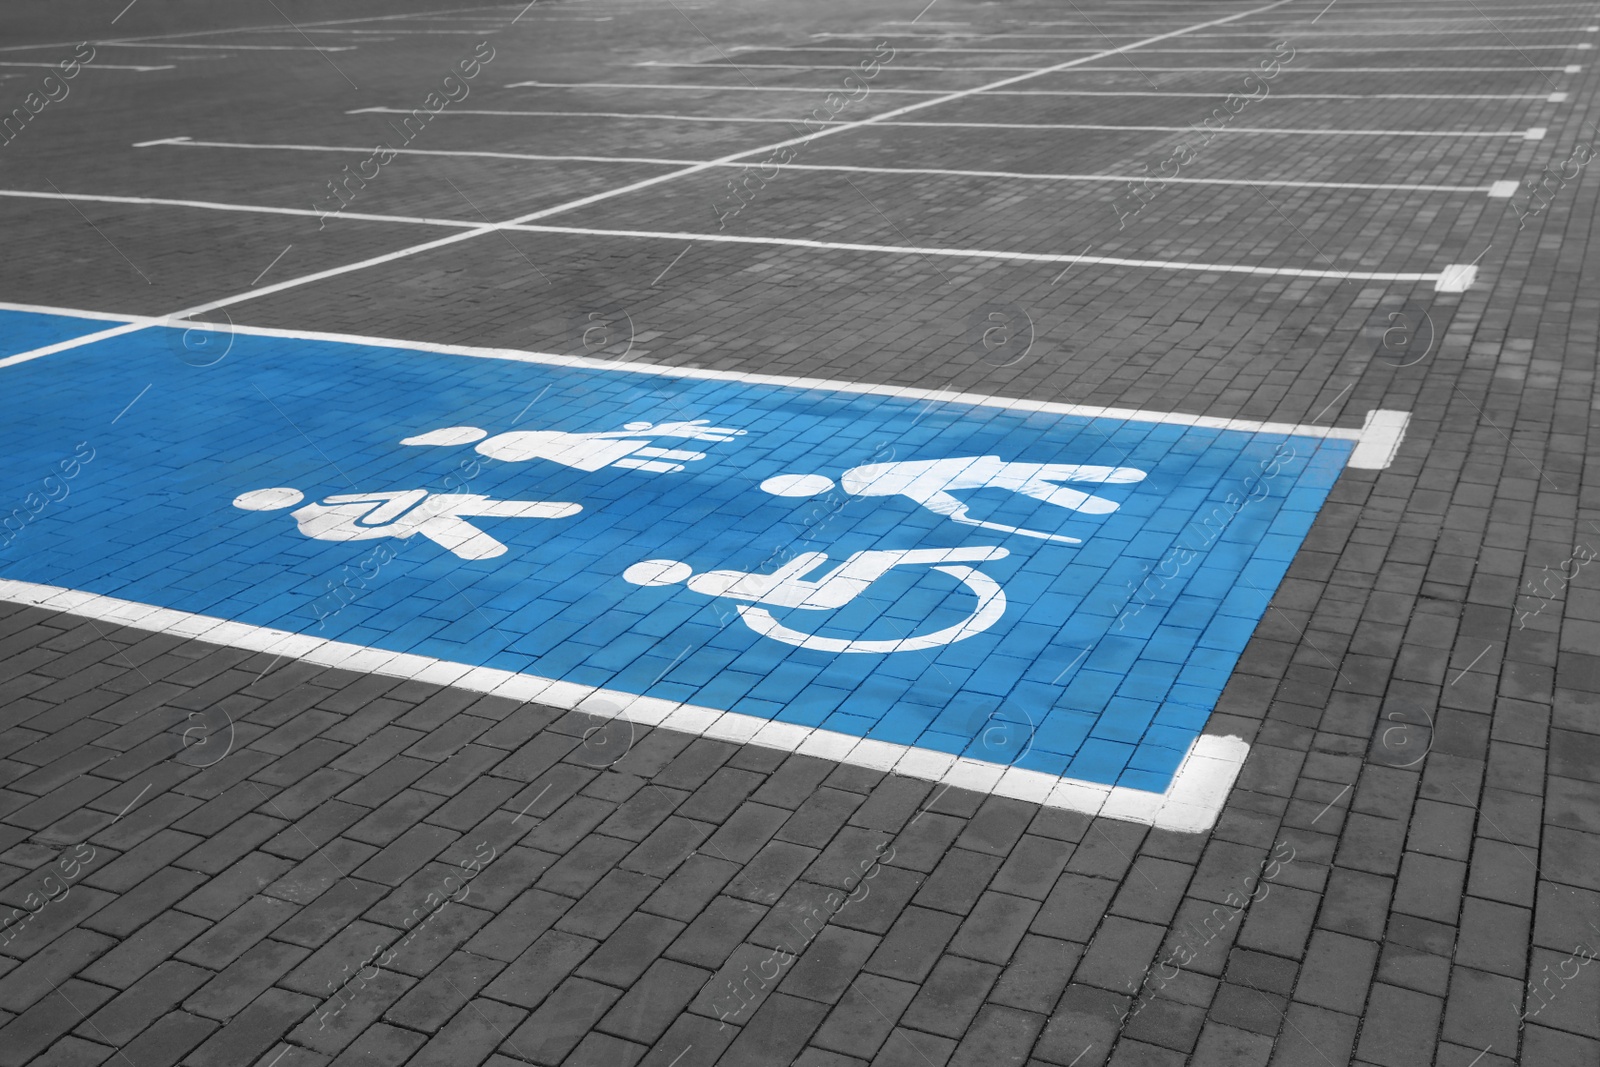 Photo of Empty car parking lot with handicapped symbols outdoors